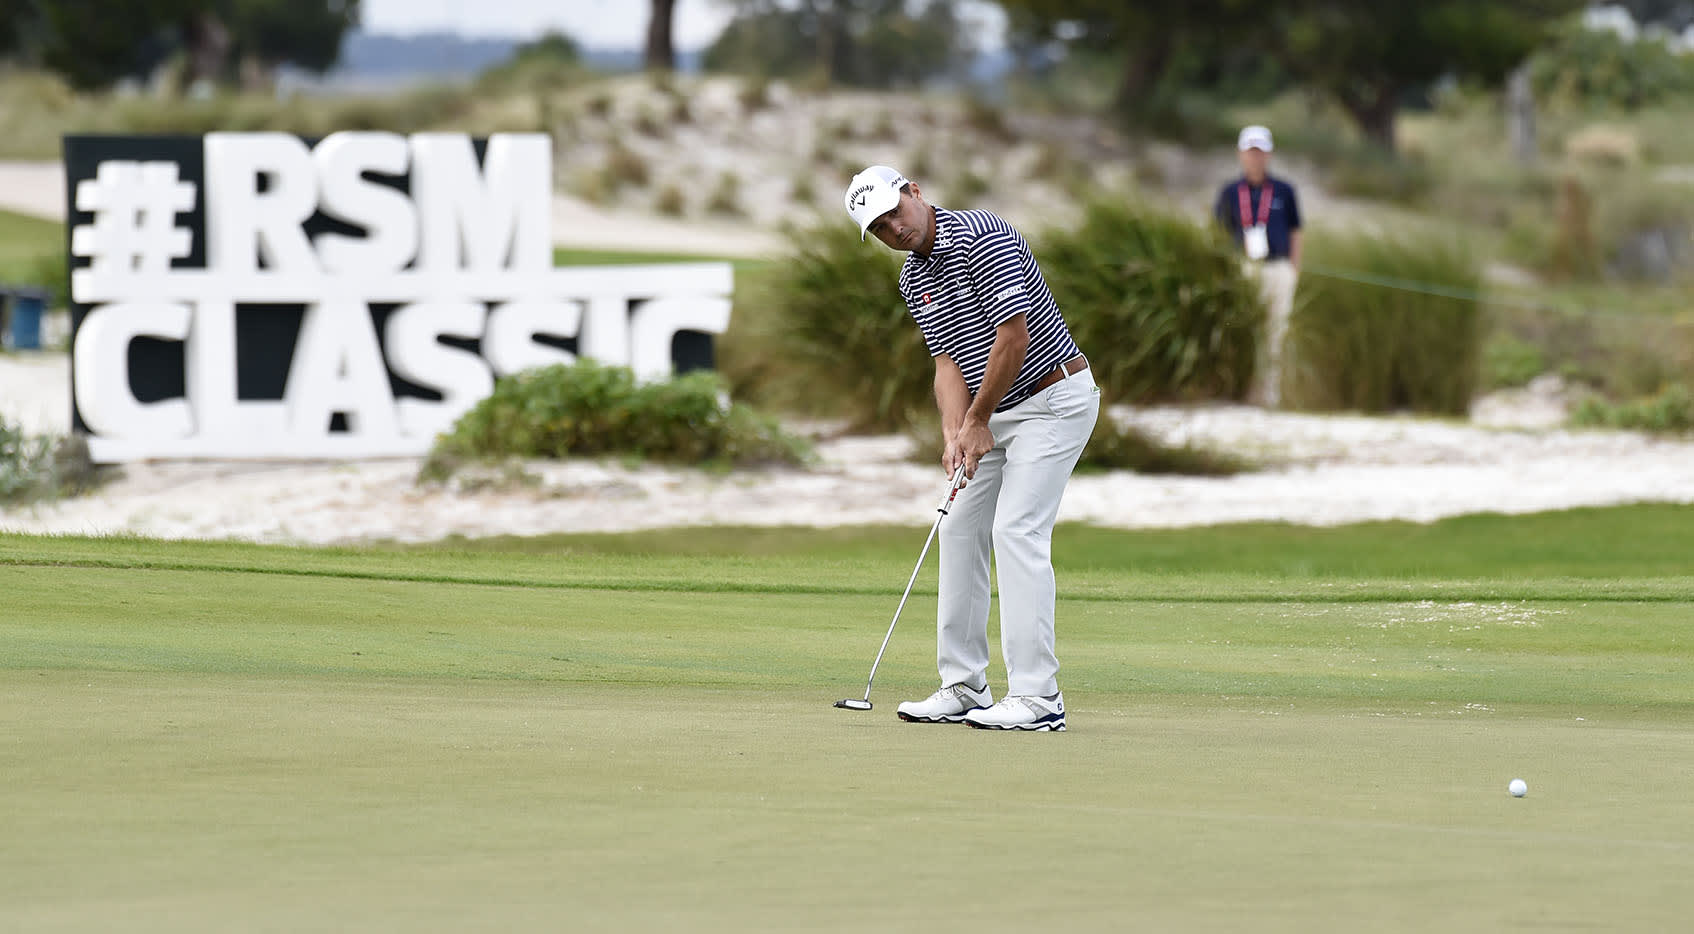 How to watch The RSM Classic, Round 1 Featured Groups, live scores